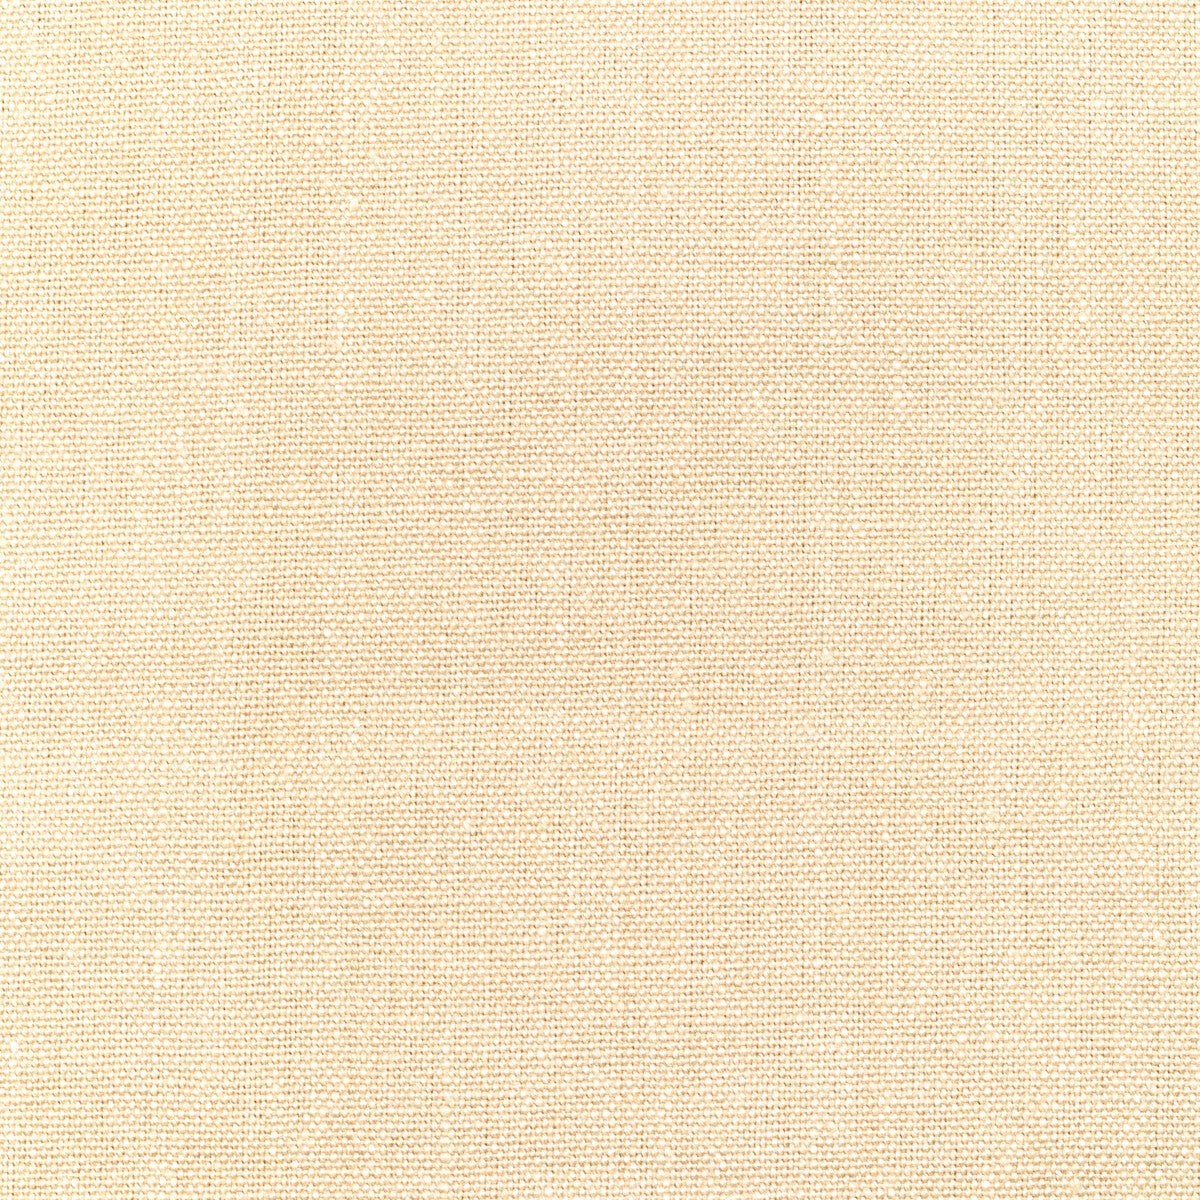 Watermill Linen fabric in cream color - pattern 2012176.1.0 - by Lee Jofa in the Colour Complements II collection